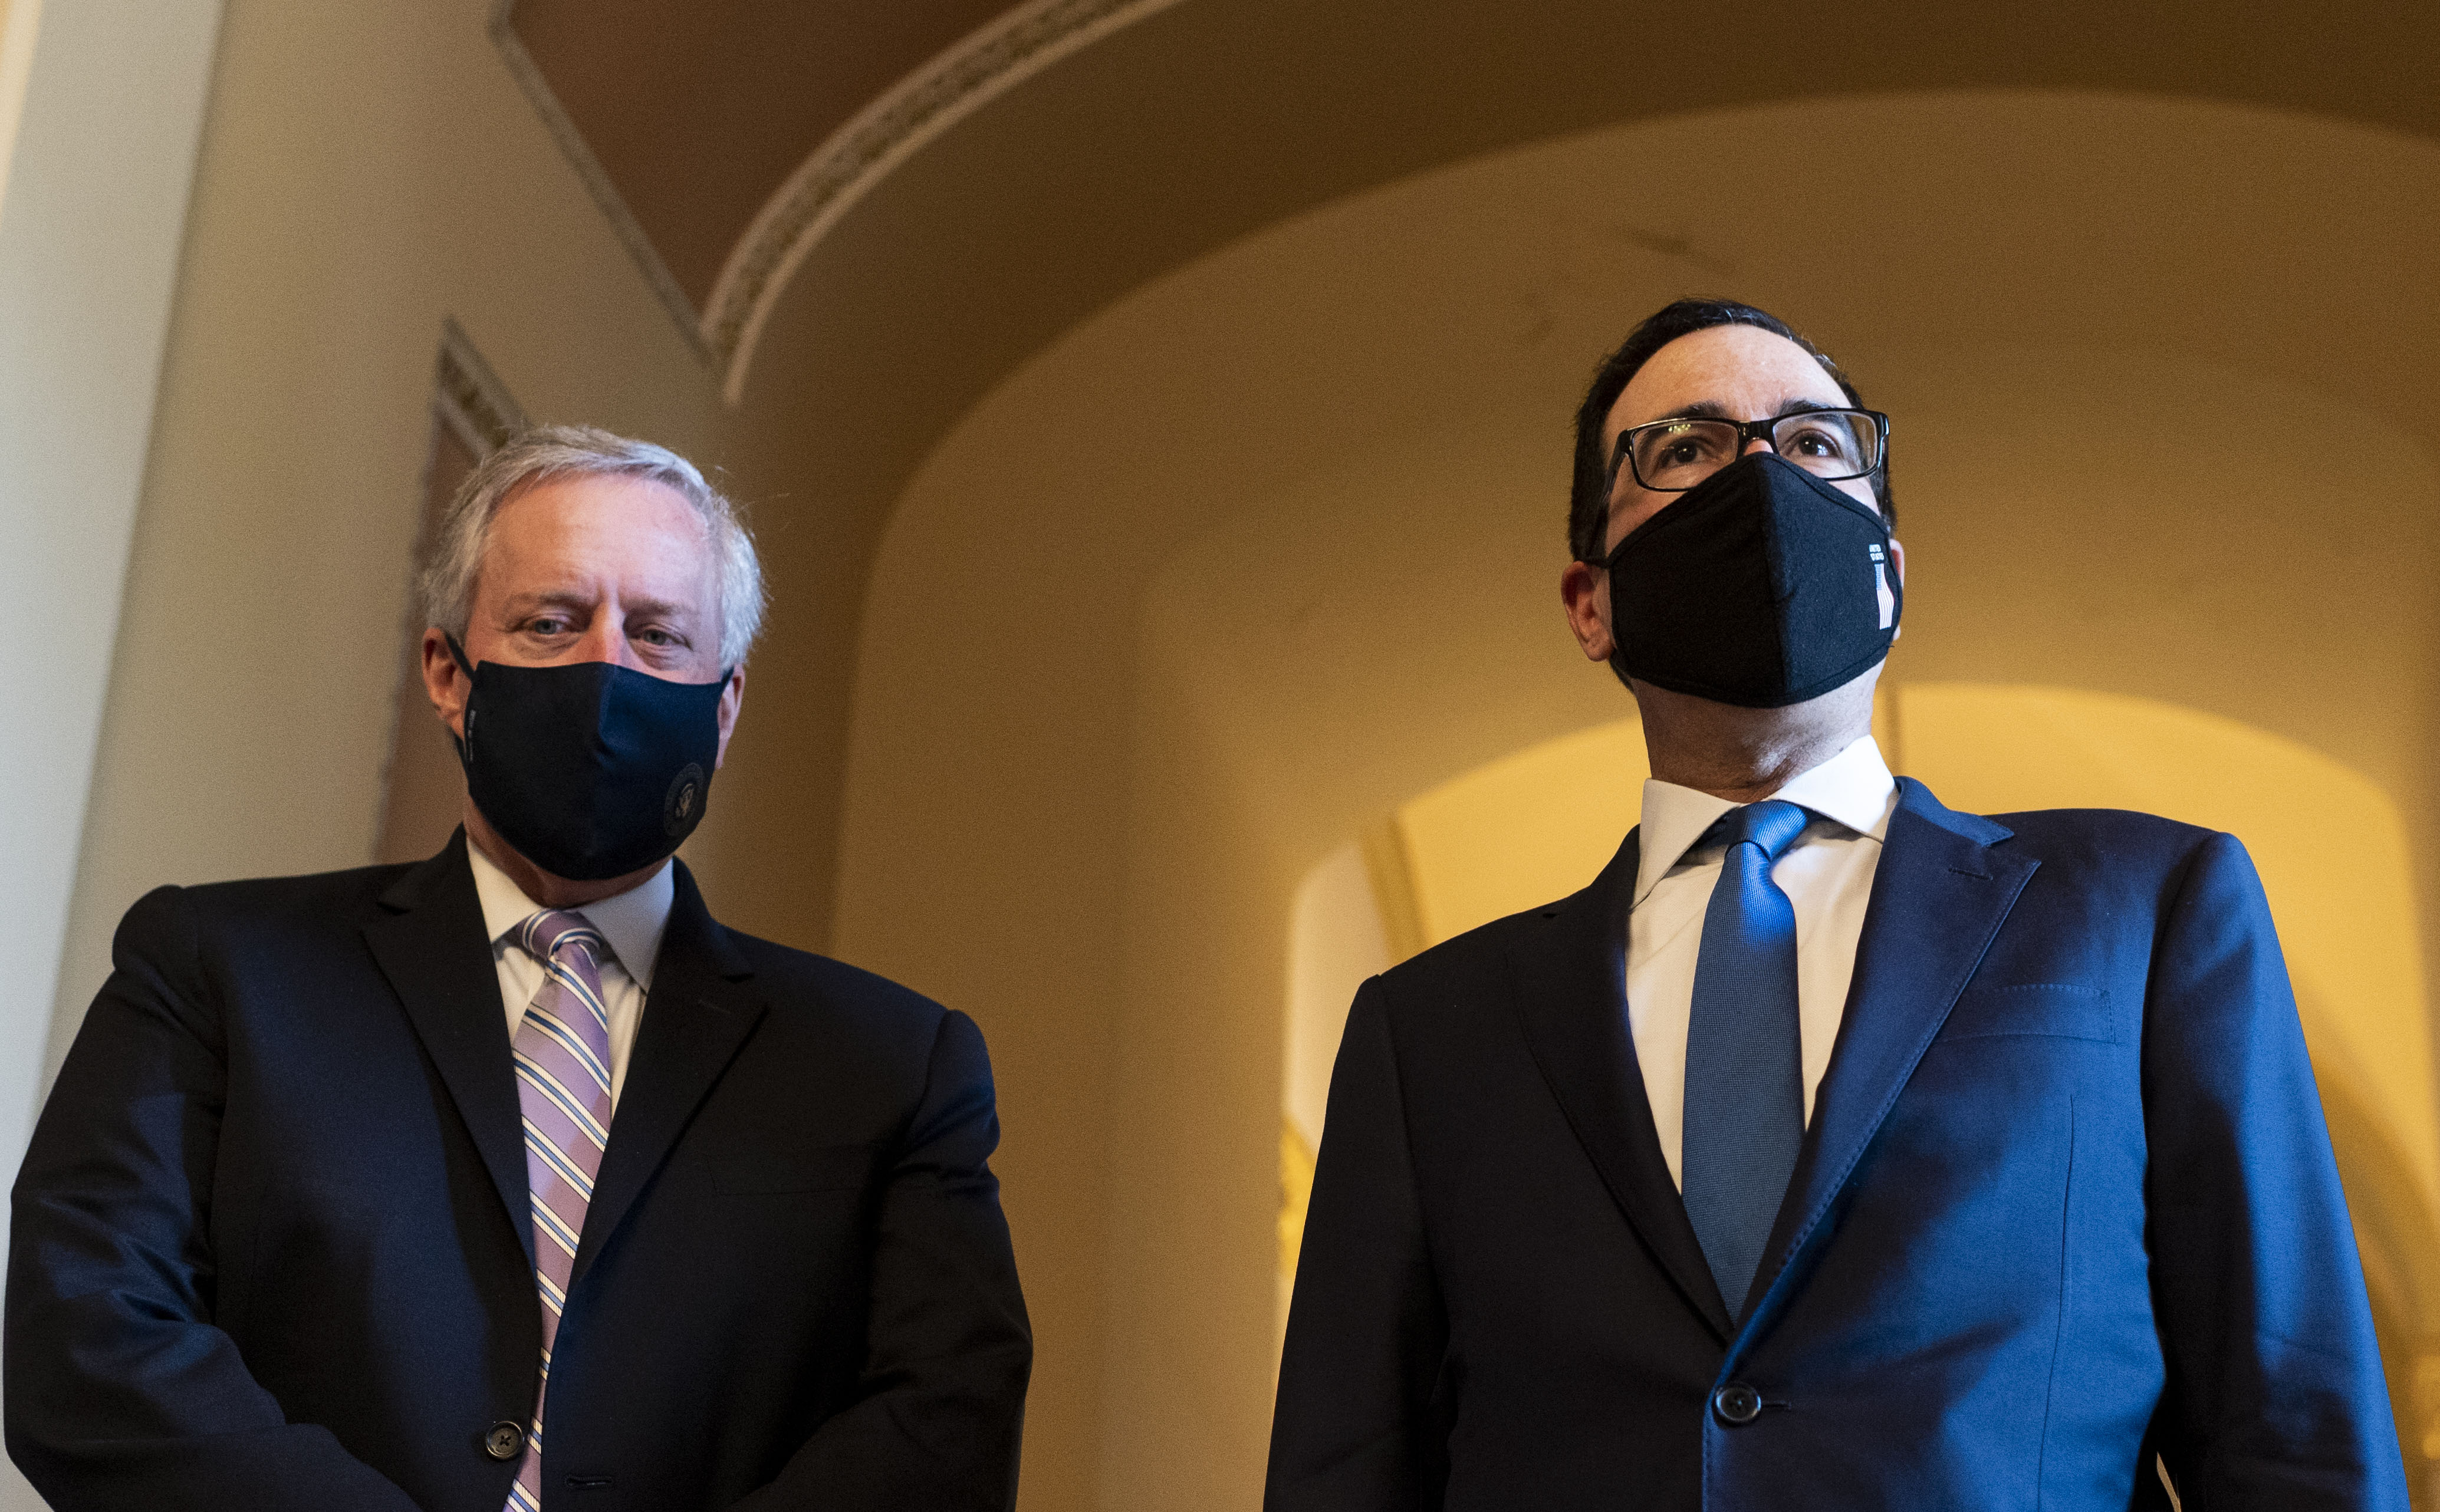 White House Chief of Staff Mark Meadows, left, and Treasury Secretary Steven Mnuchin speak to reporters as they leave a coronavirus aid meeting in Washington, DC, on July 23.